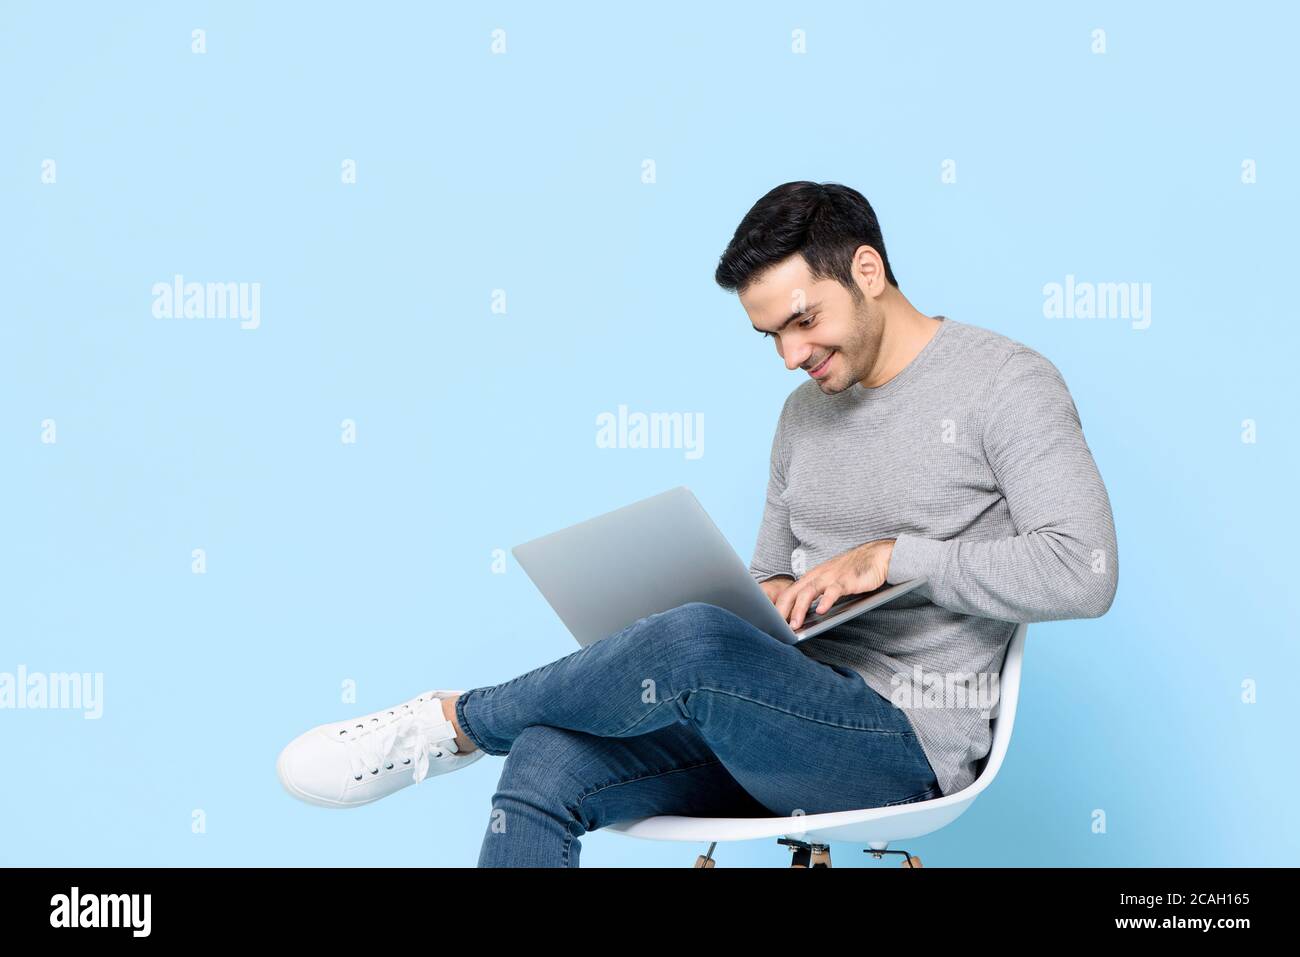 Work from home concept portrait of happy young handsome Caucasian man sitting and using laptop in isolated studio blue background Stock Photo